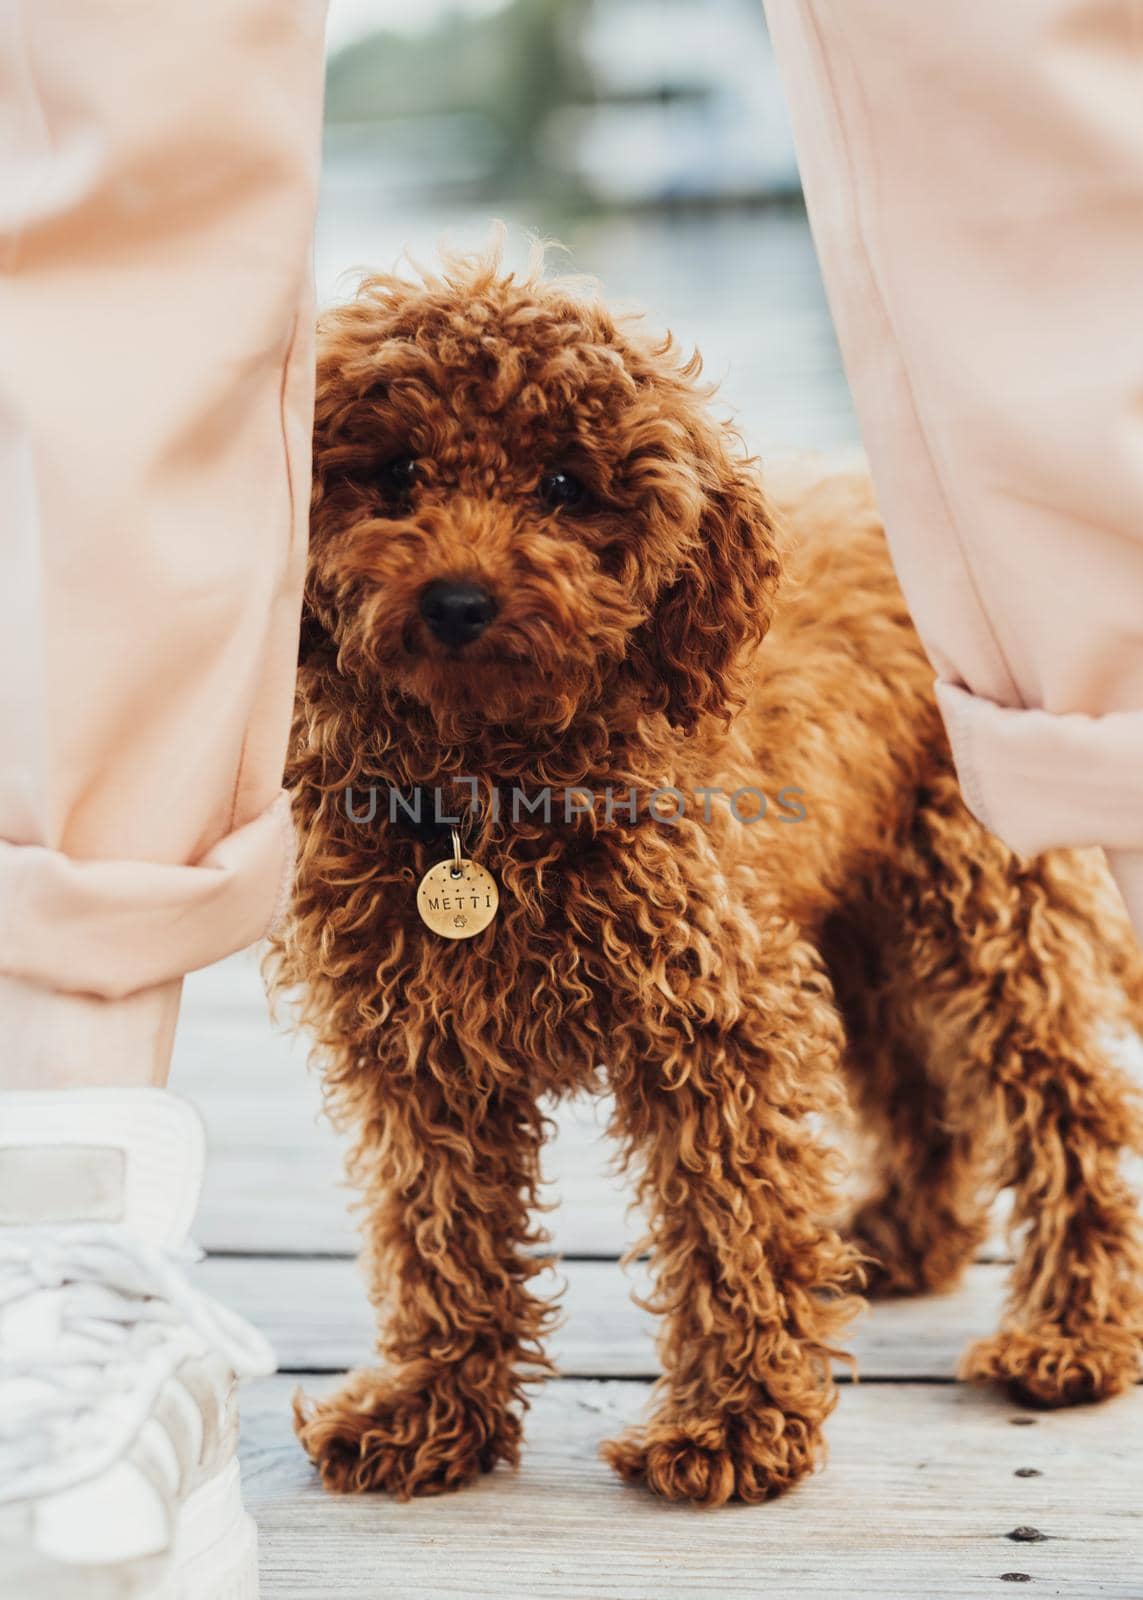 Cute little toy poodle called Metti is hiding behind owner's legs